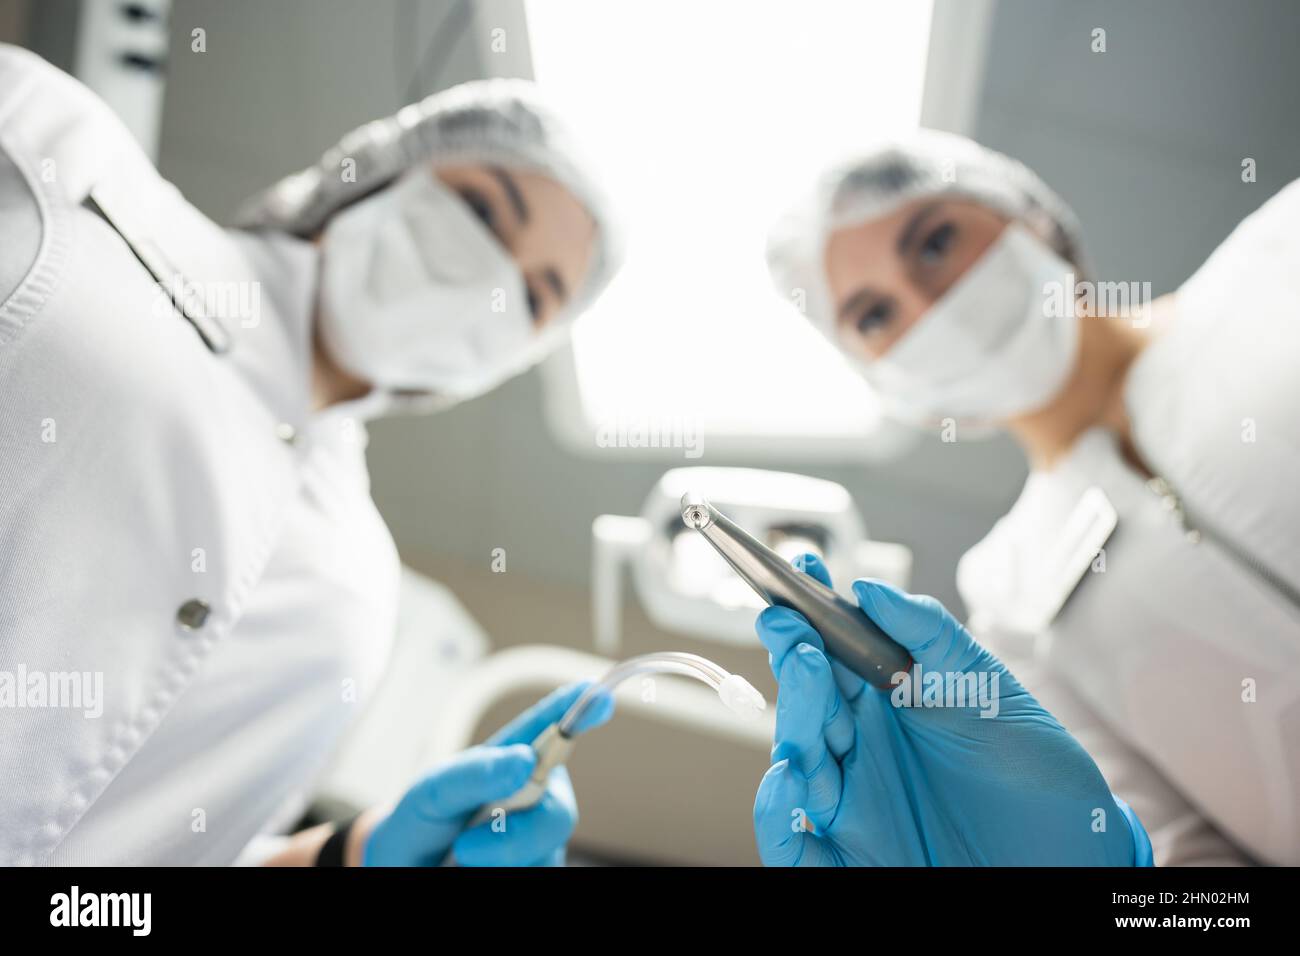 Dentist and assistant at work. Patient's point of view Stock Photo